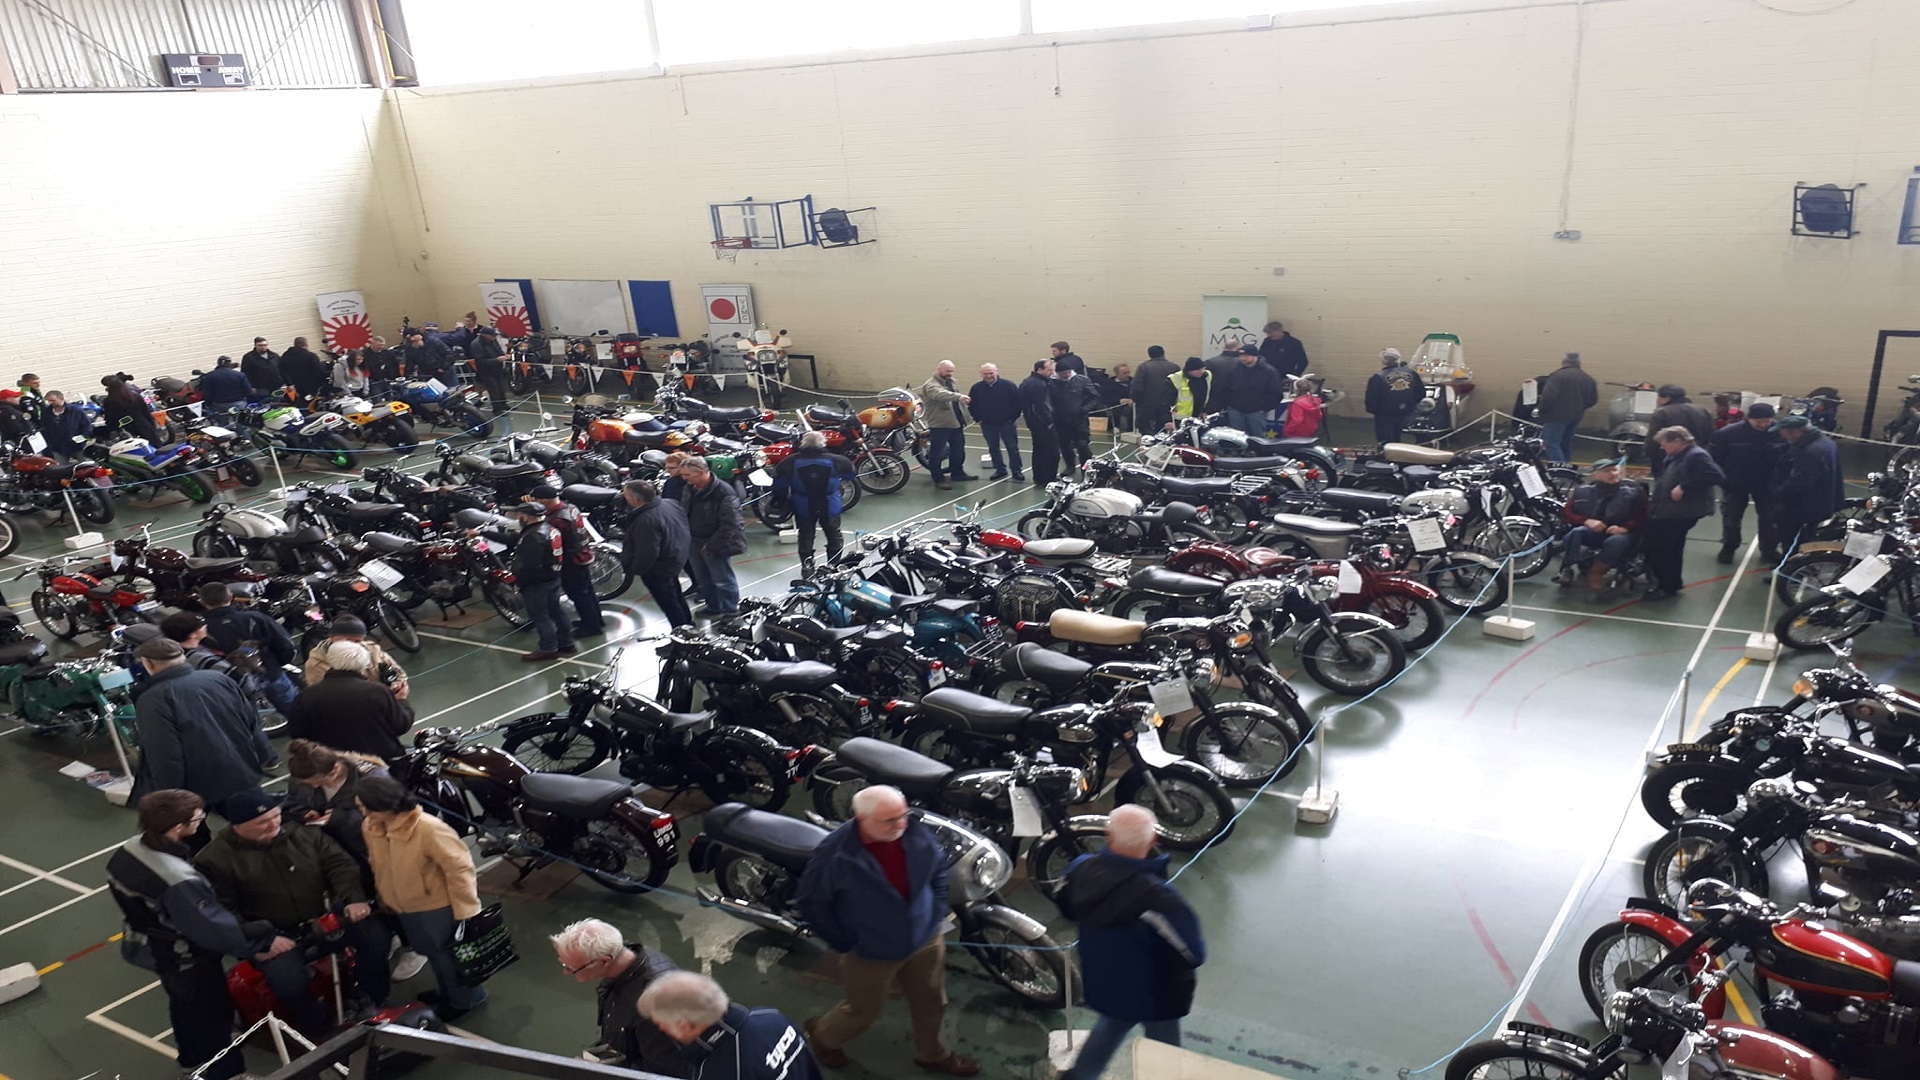 Leinster Classic Motorcycle Show